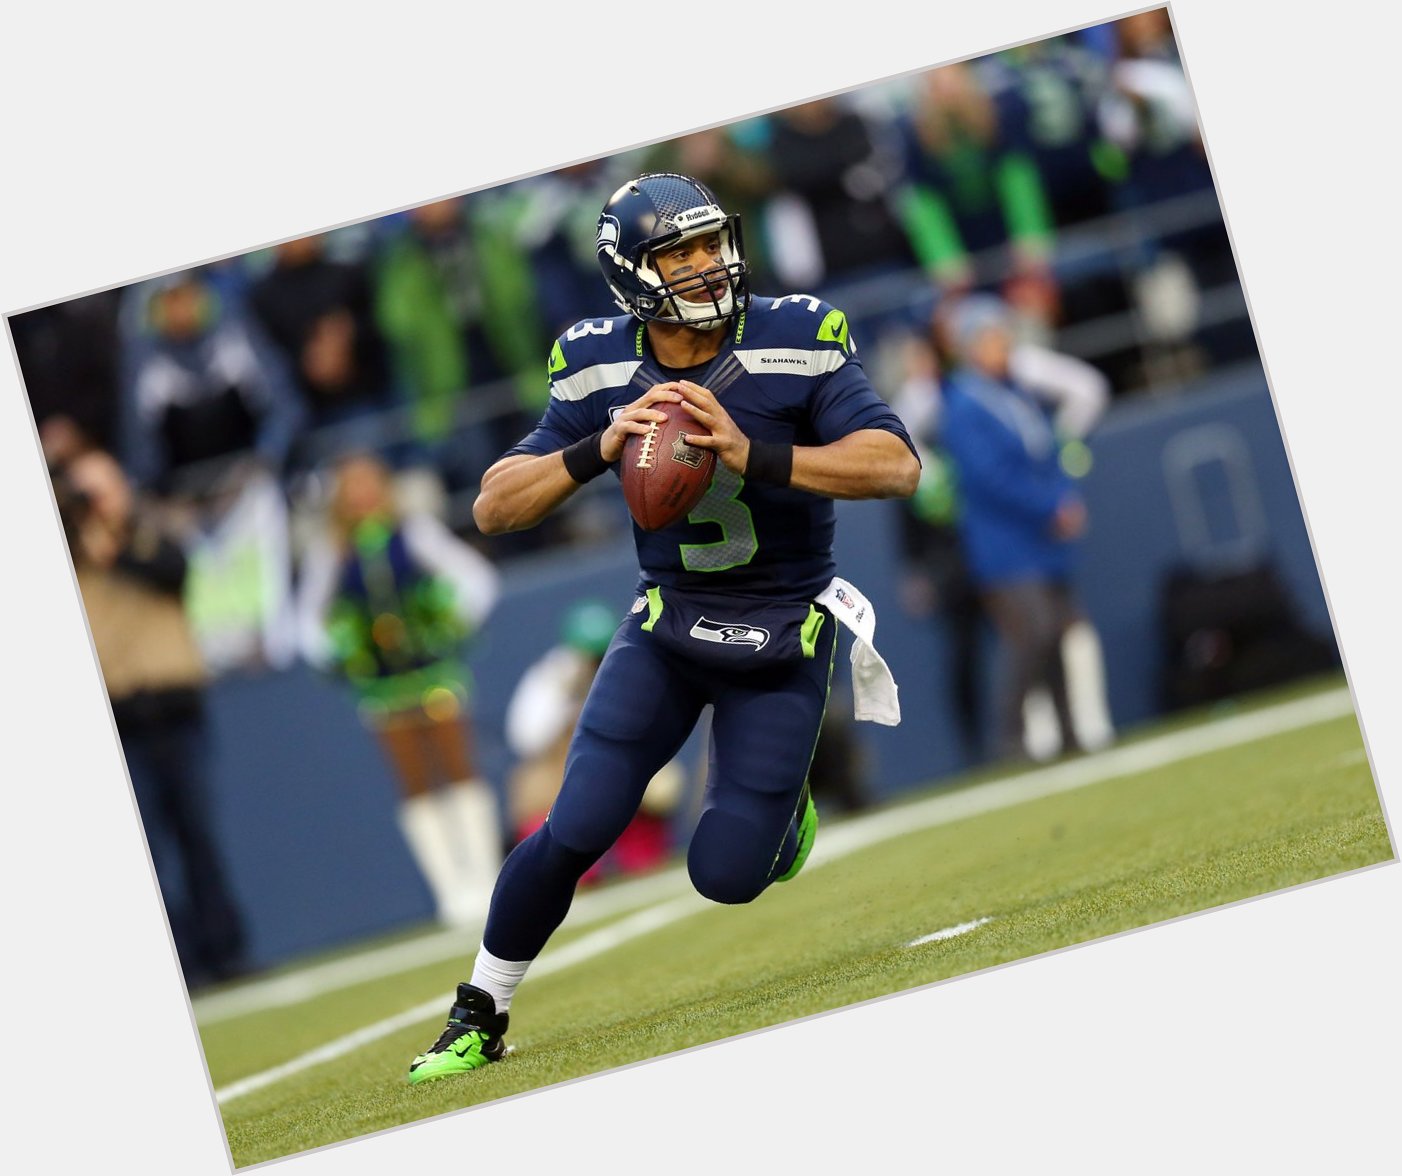 Happy Birthday to Russell Wilson who turns 32 today! 